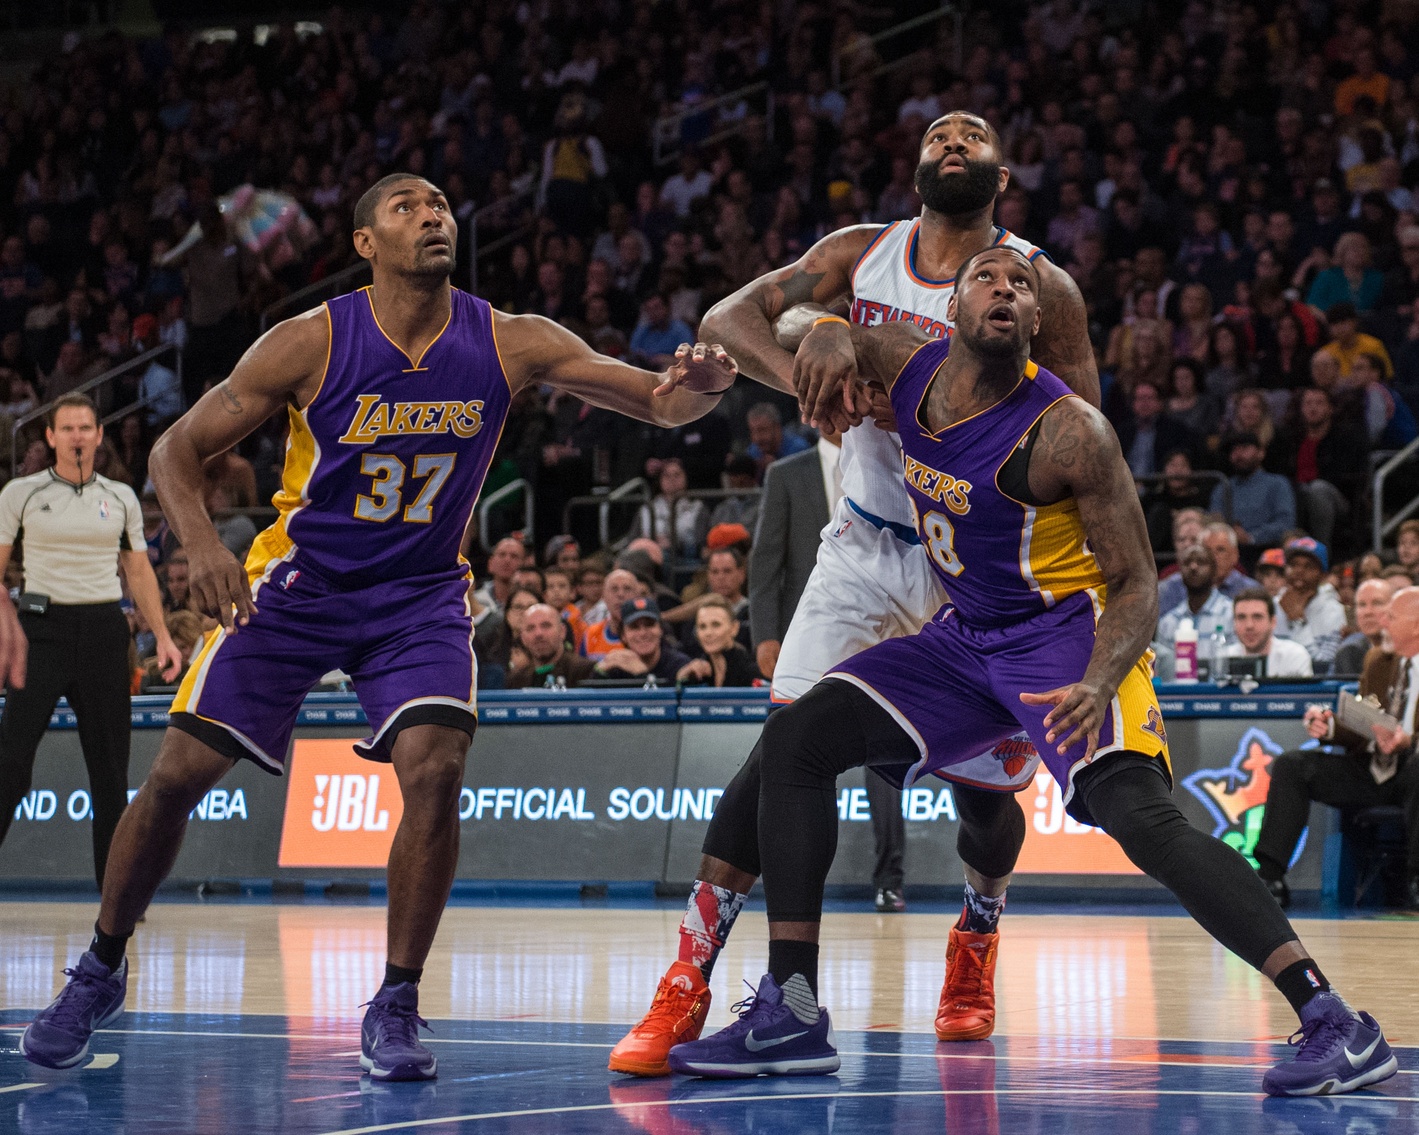 New York Knicks look to improve to 2-0 on West Coast trip against Los Angeles Lakers 